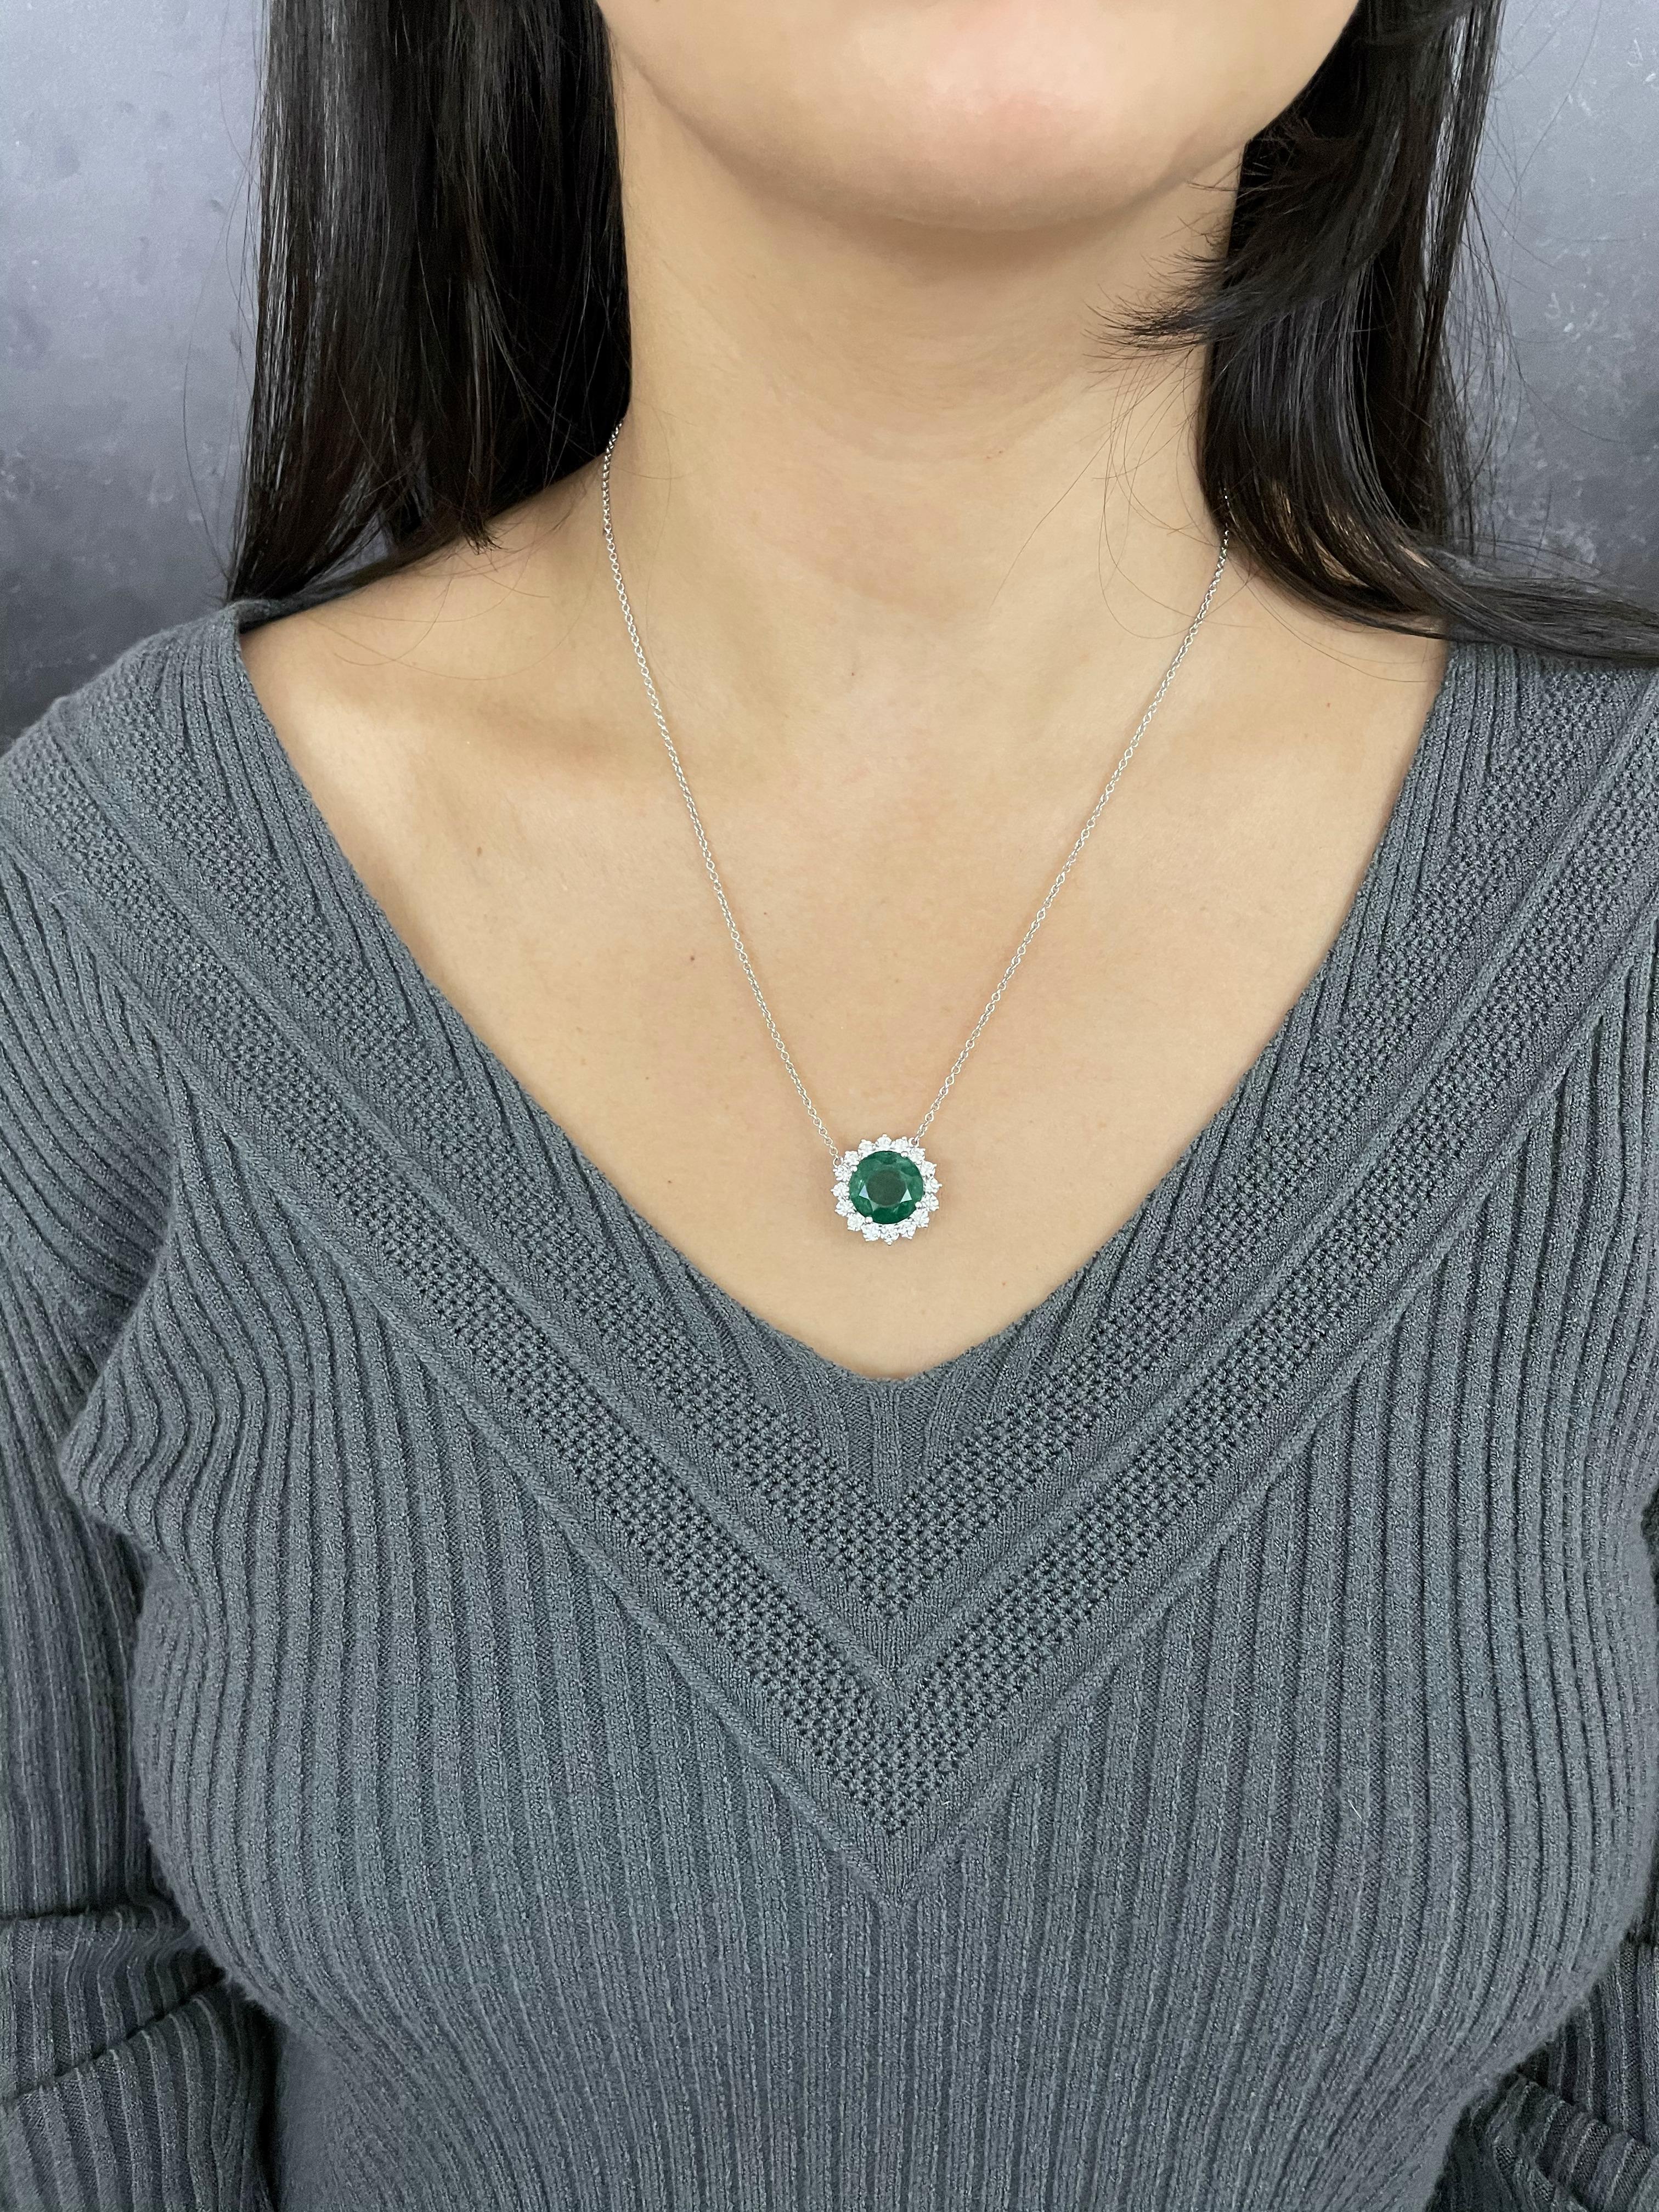 Bold and beautiful, this stunning 7.05 Carat Emerald is encircled by 16 sparkling White Diamonds.  The pendant is suspended by a 17-inch franco chain.  

Material: 18k White Gold 
Stone Details: 1 Round Cut Emerald at 7.05 Carats
16 Round Diamonds